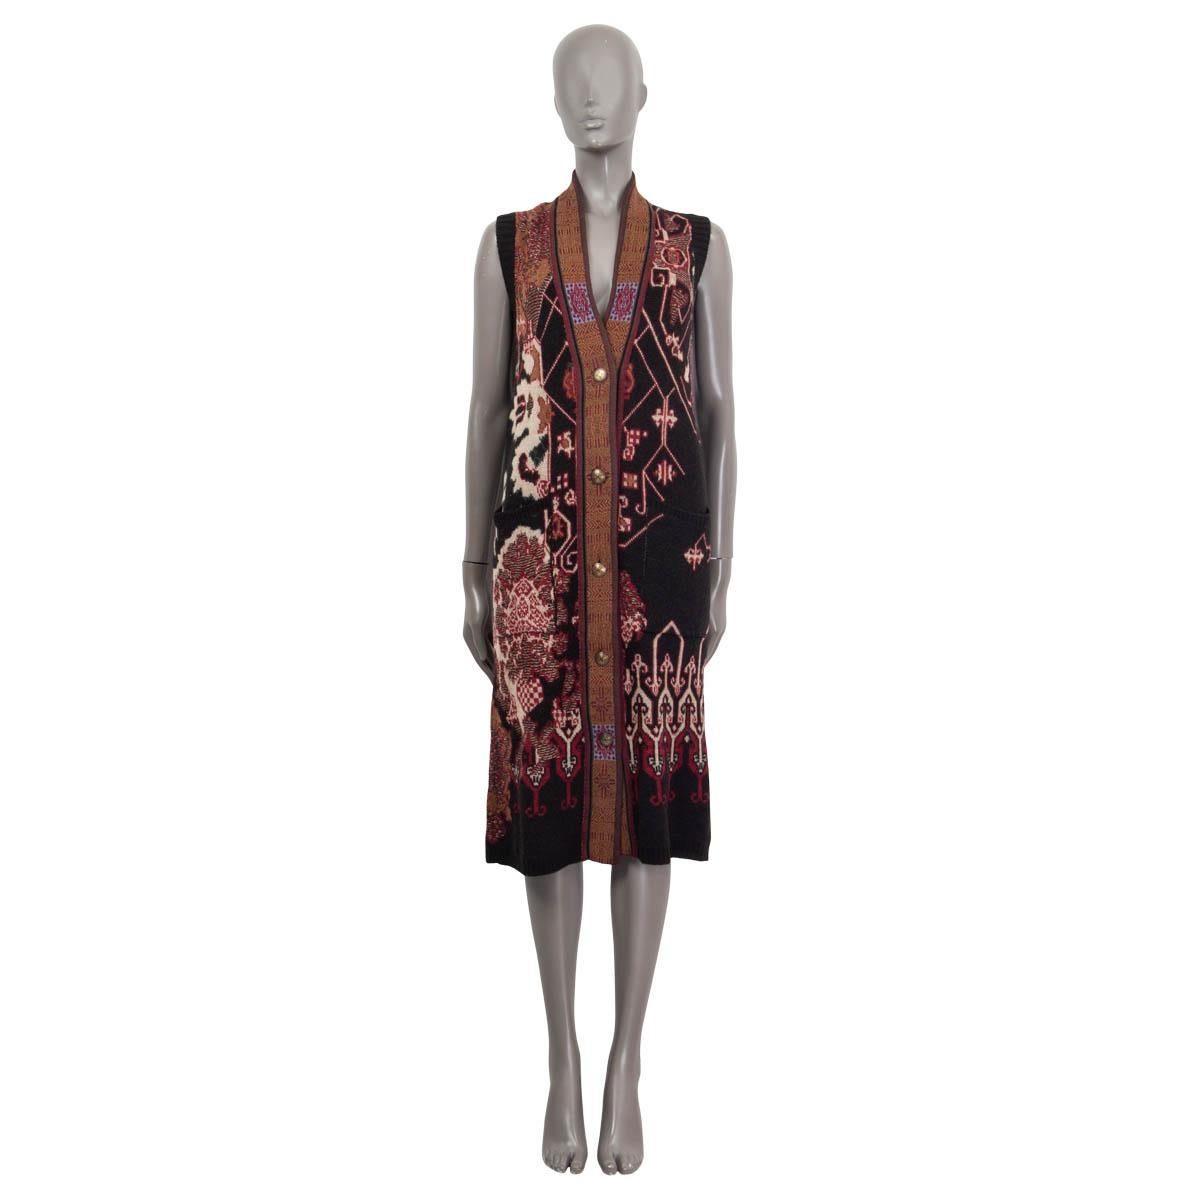 100% authentic Etro sleeveless long knit coat in burgundy, black, beige, green and sage wool (61%), acrylic (18%), alpaca (16%), viscose (4%) and polyester (1%) - please note the content tag is missing. Features a deep v-neck and two patch pockets